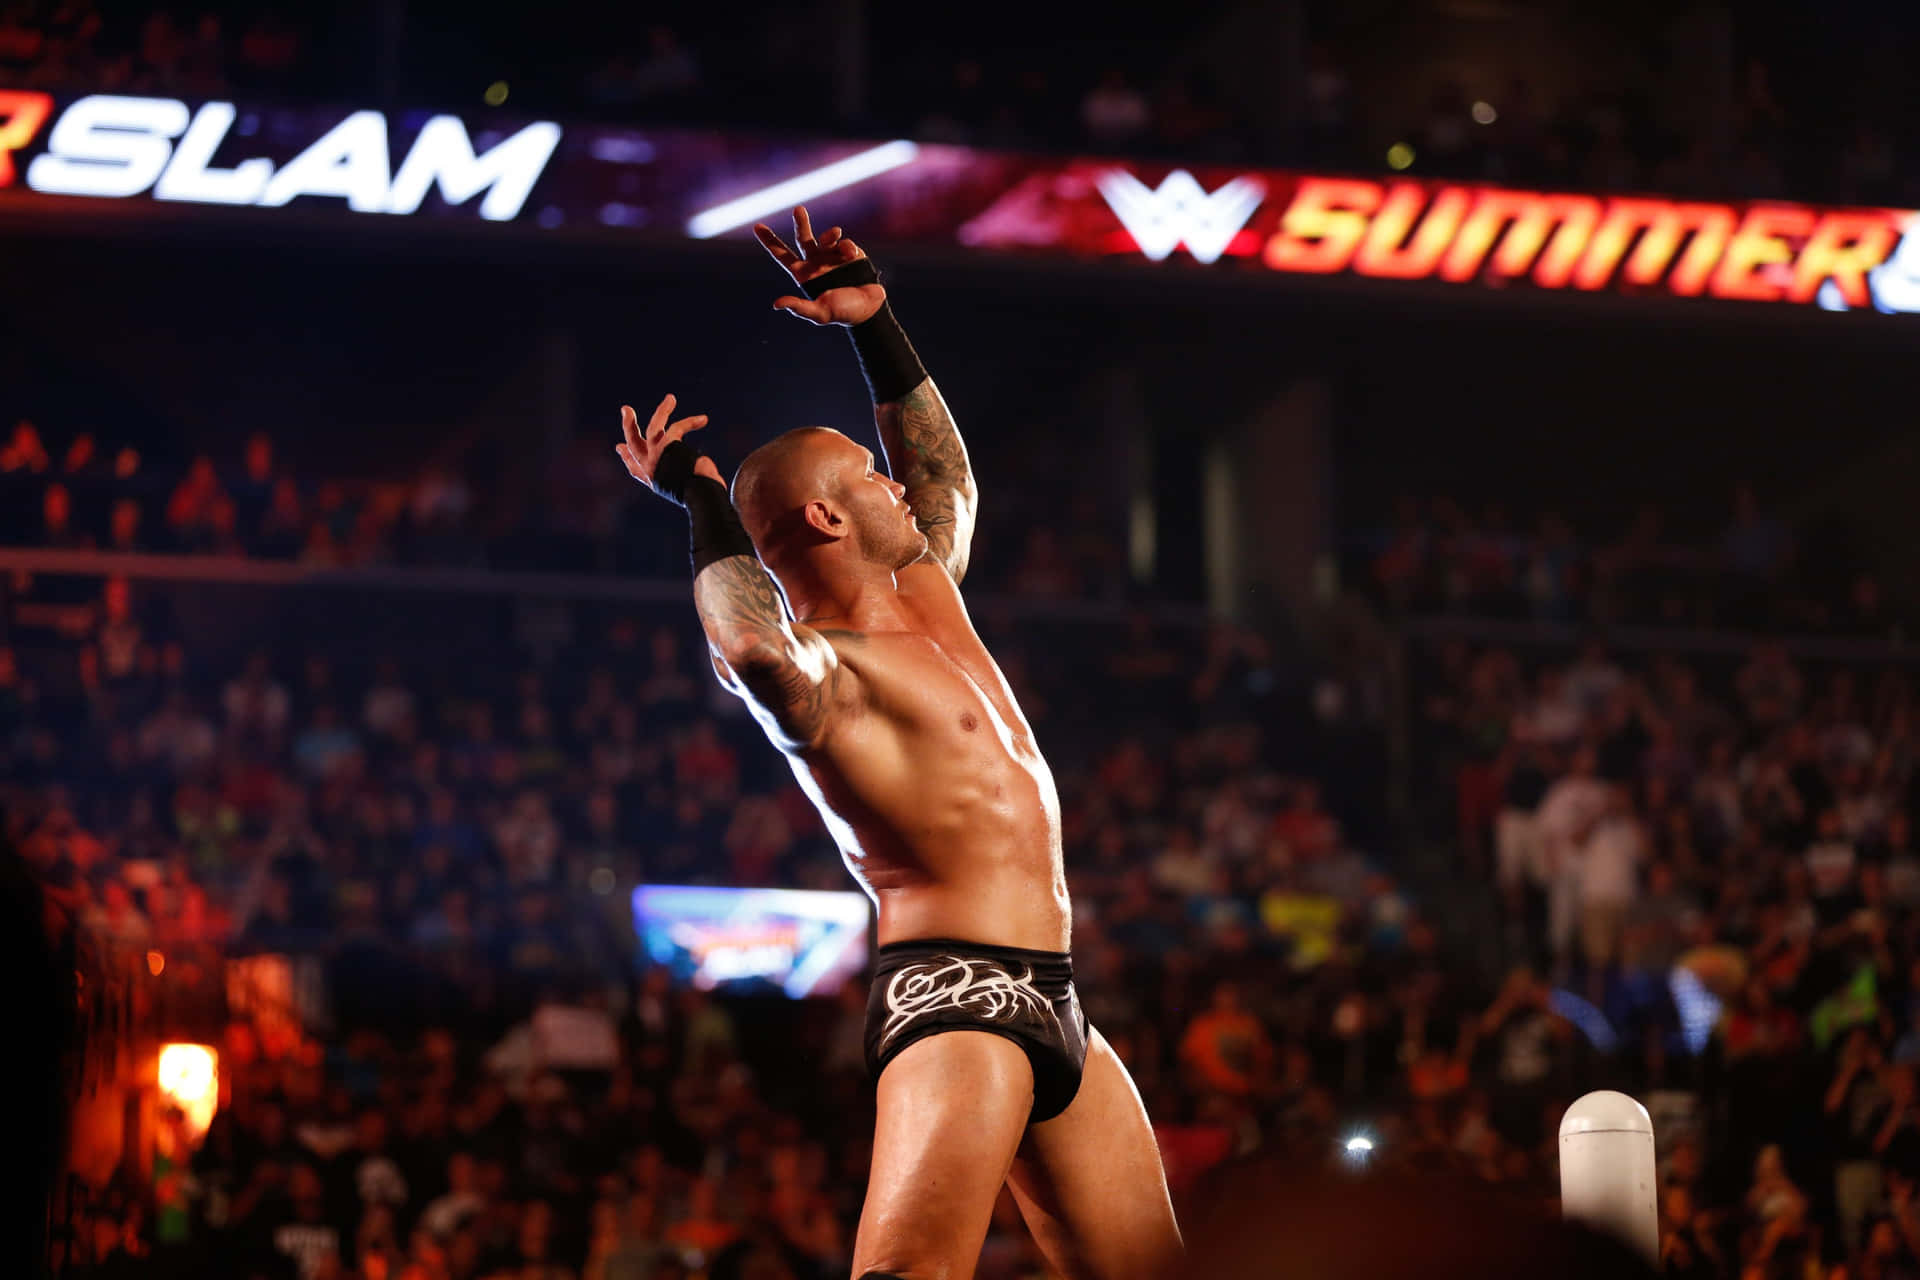 SANTA CLARA - MARCH 29: Close-up Of WWE Wrestler Randy Orton Does Signature  Pose With Arms Held In The Air On Turnbuckle Before Match At Wrestlemania  31 At The Levi's Stadium In